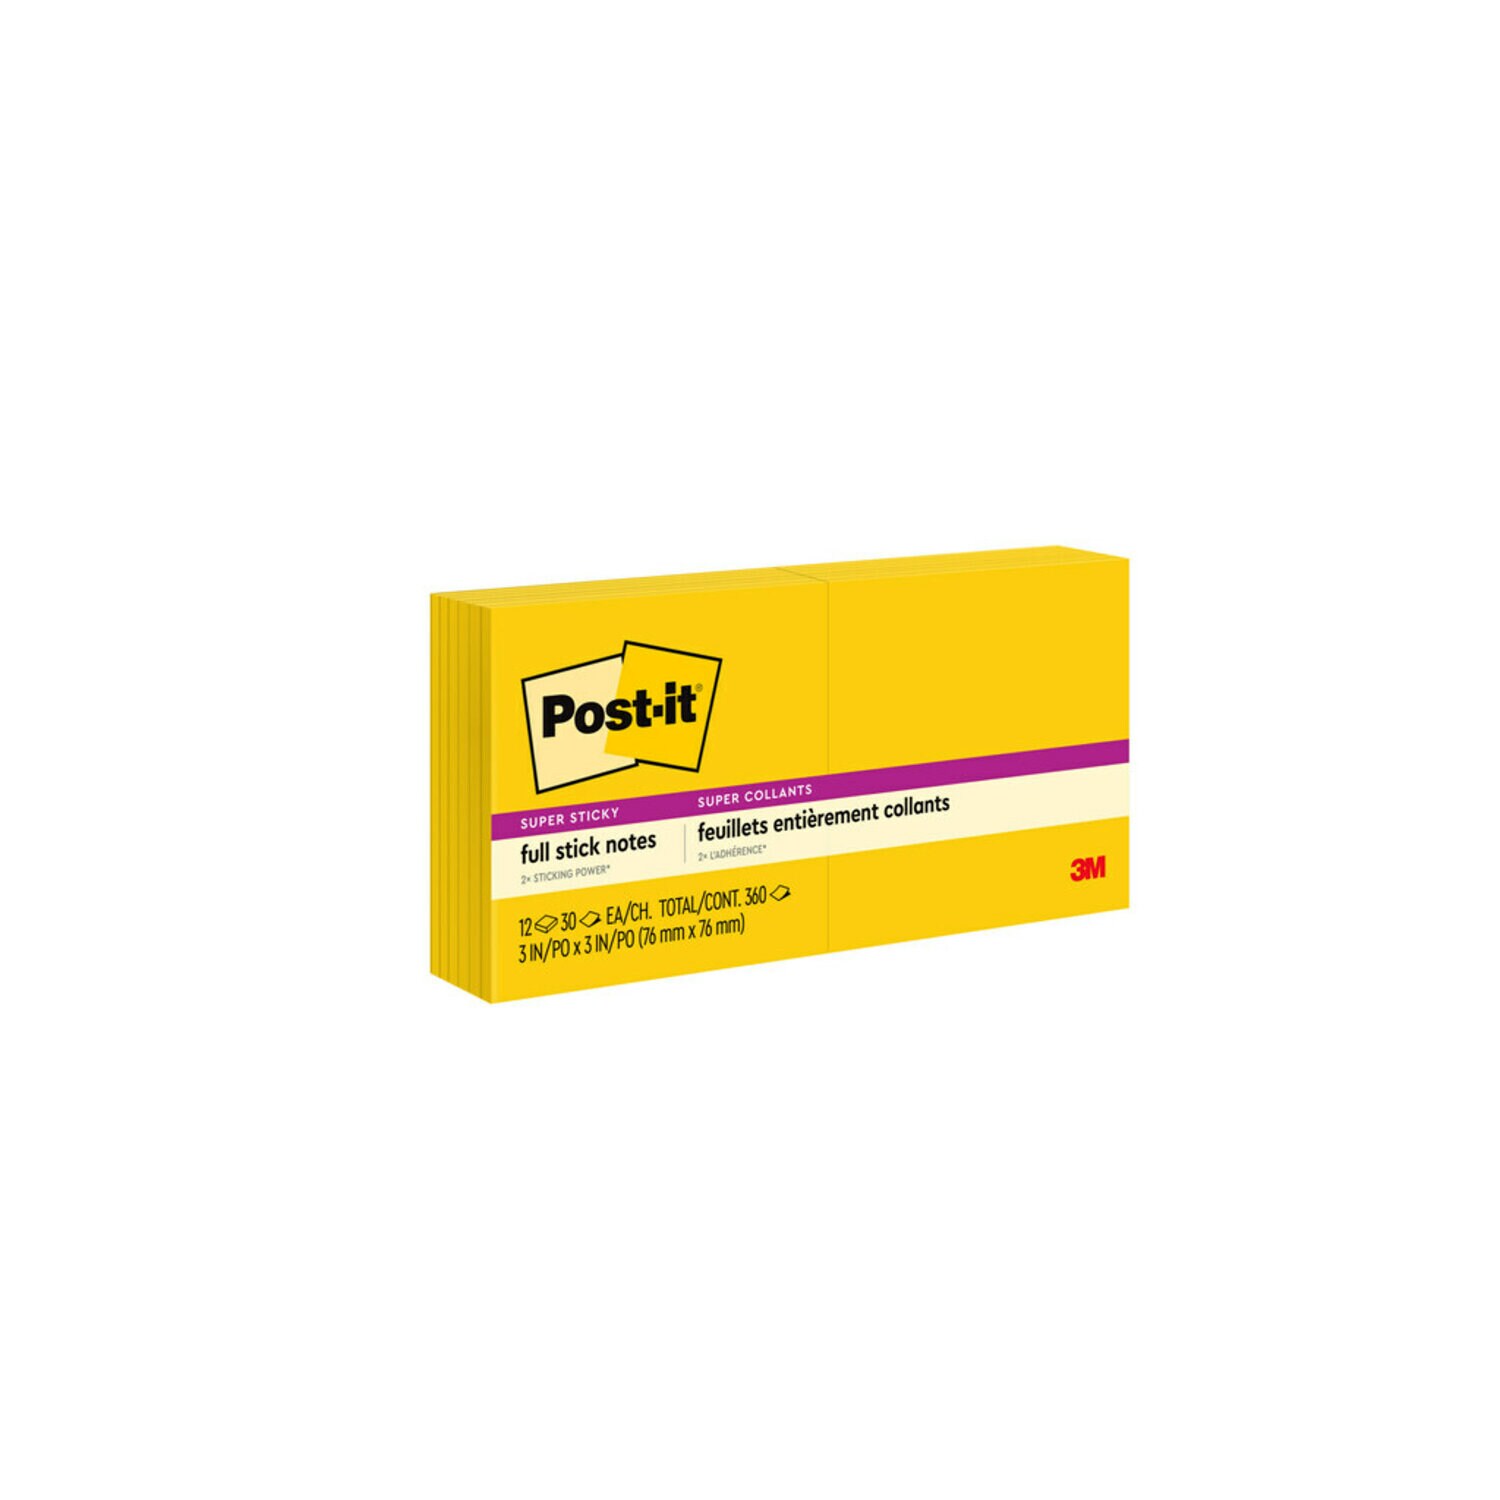 7100229948 - Post-it Super Sticky Full Stick Notes F330-12SSY, 3 in x 3 in (76 mm x 76 mm), 3M Yellow